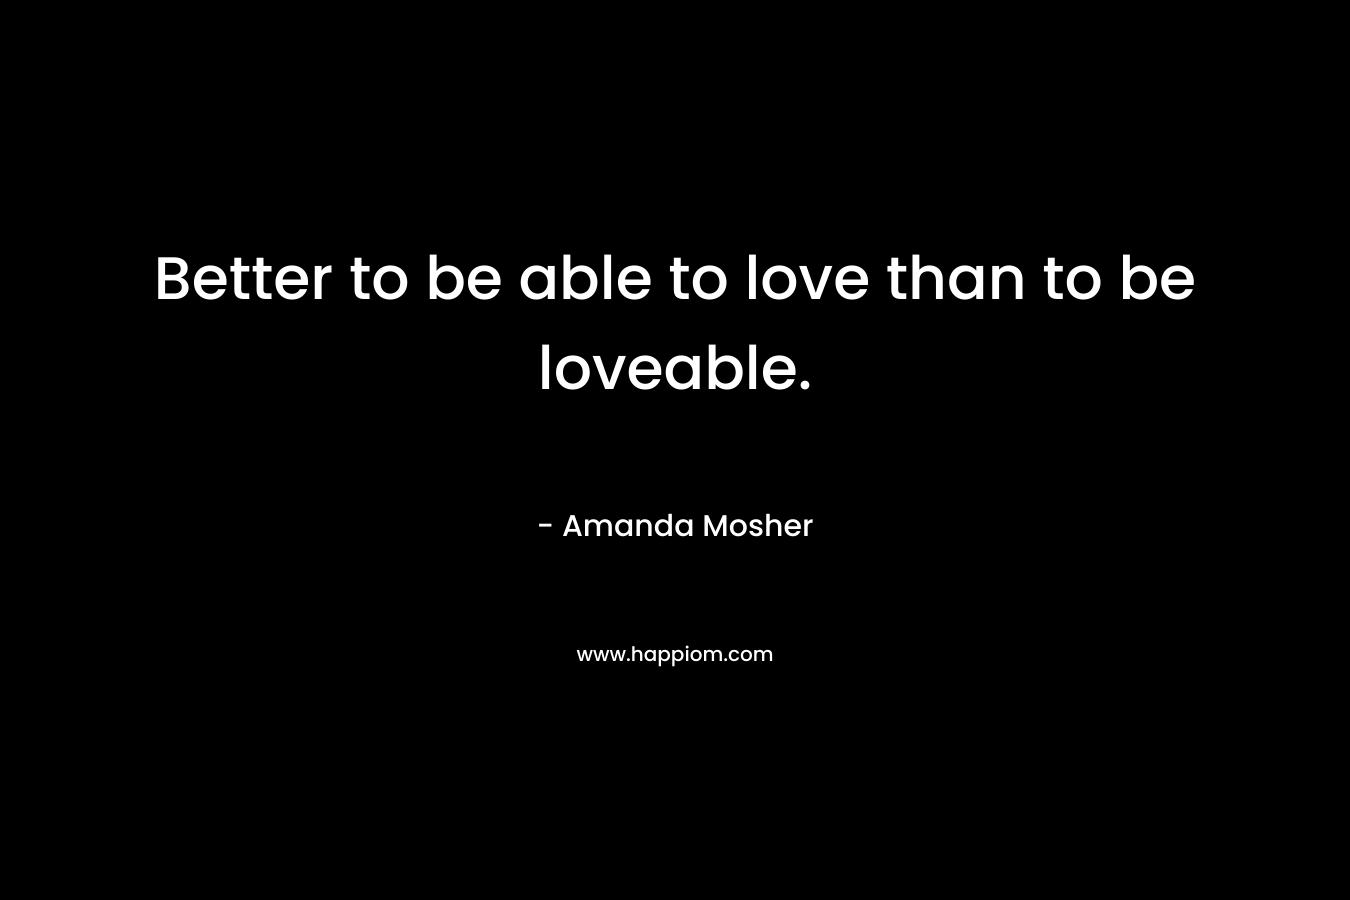 Better to be able to love than to be loveable.